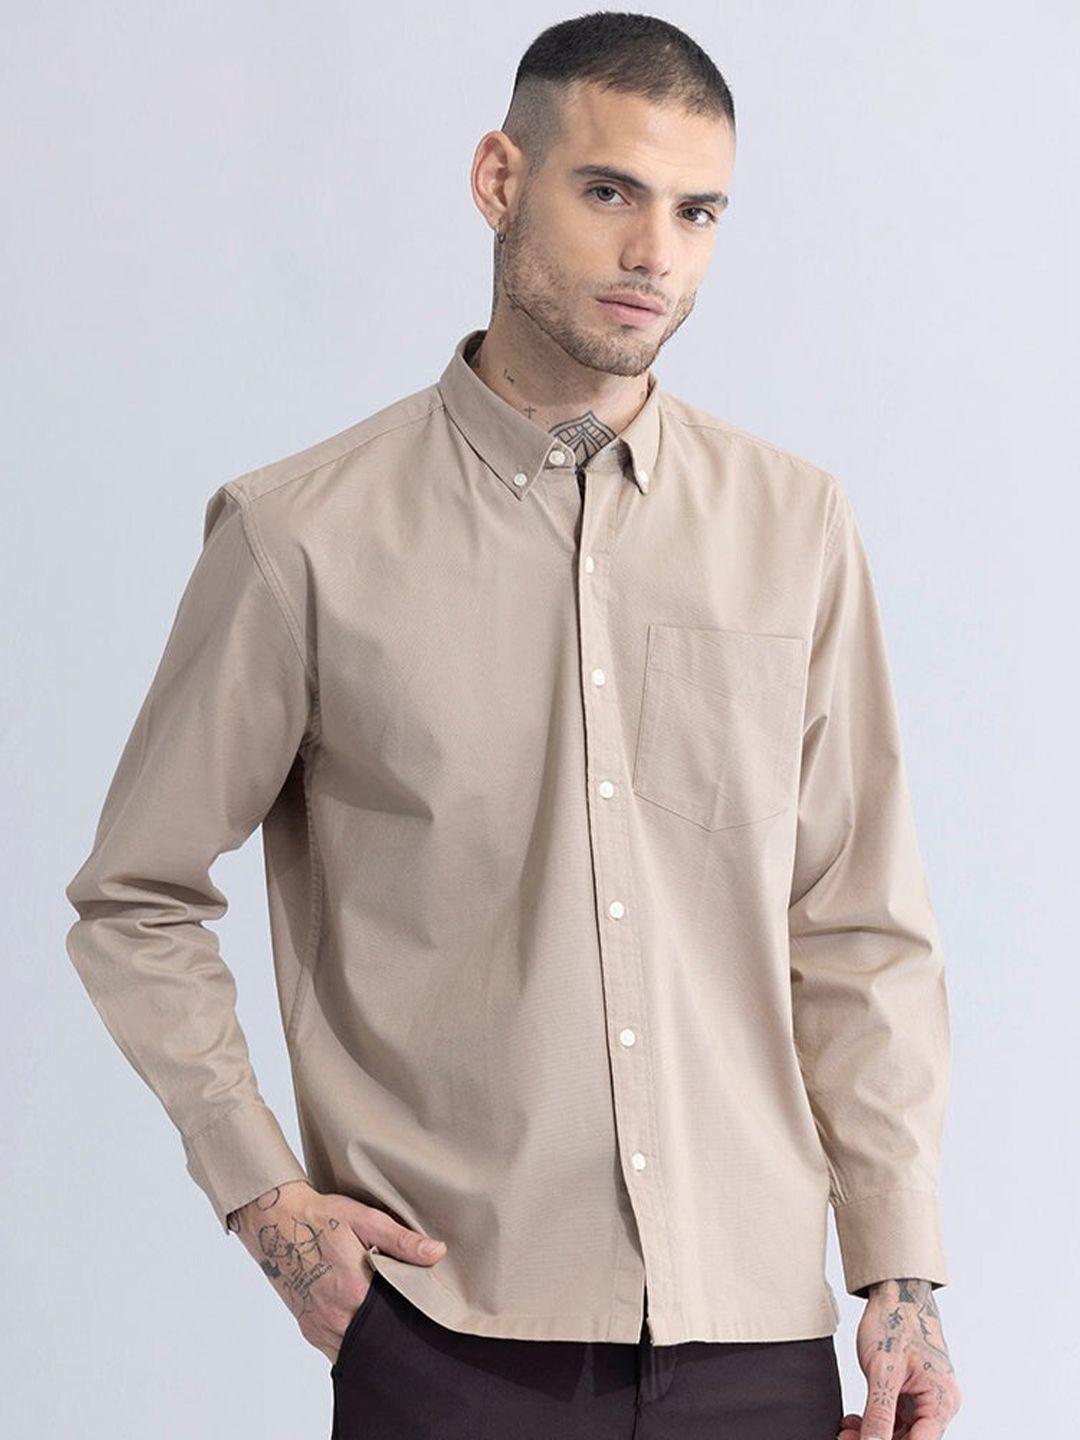 snitch-button-down-collar-long-sleeves-classic-slim-fit-cotton-casual-shirt